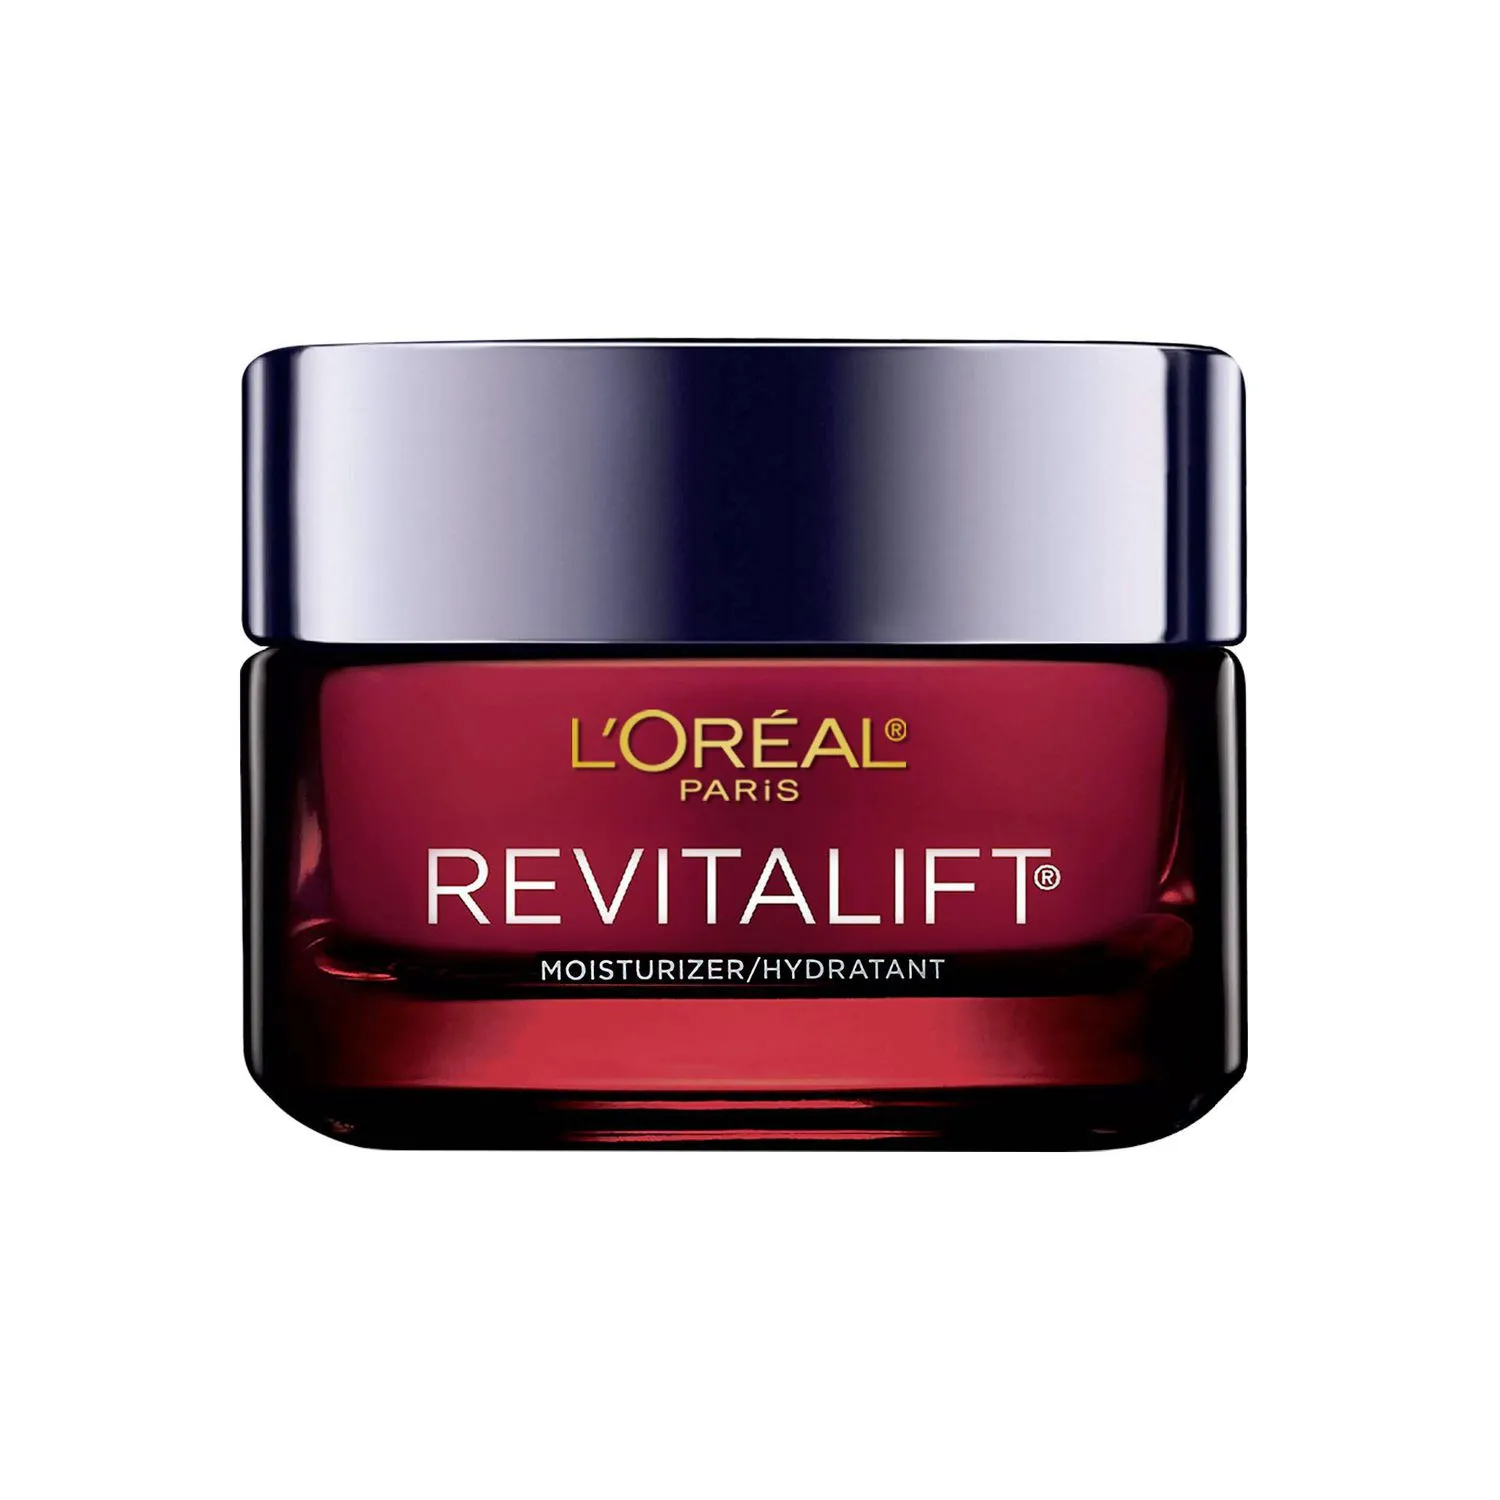 Revitalift Moisturizer by L'Oreal, the best pro-retinol face moisturizer, available worldwide.